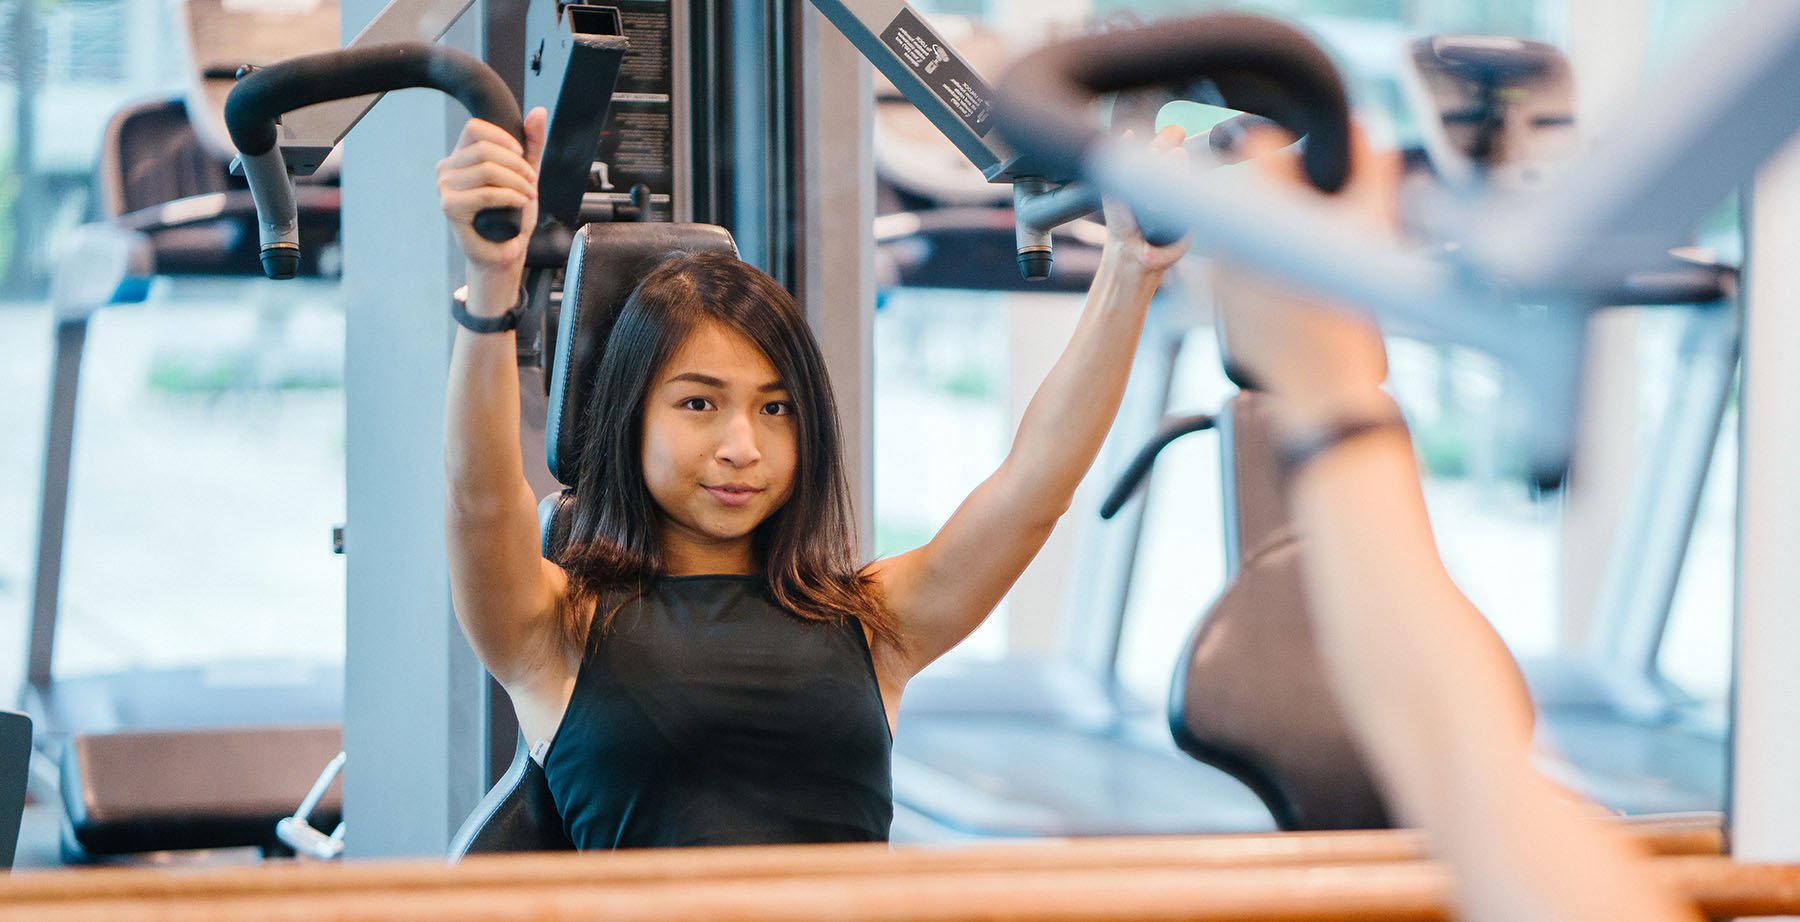 a woman raises her arms while on exercise equipment